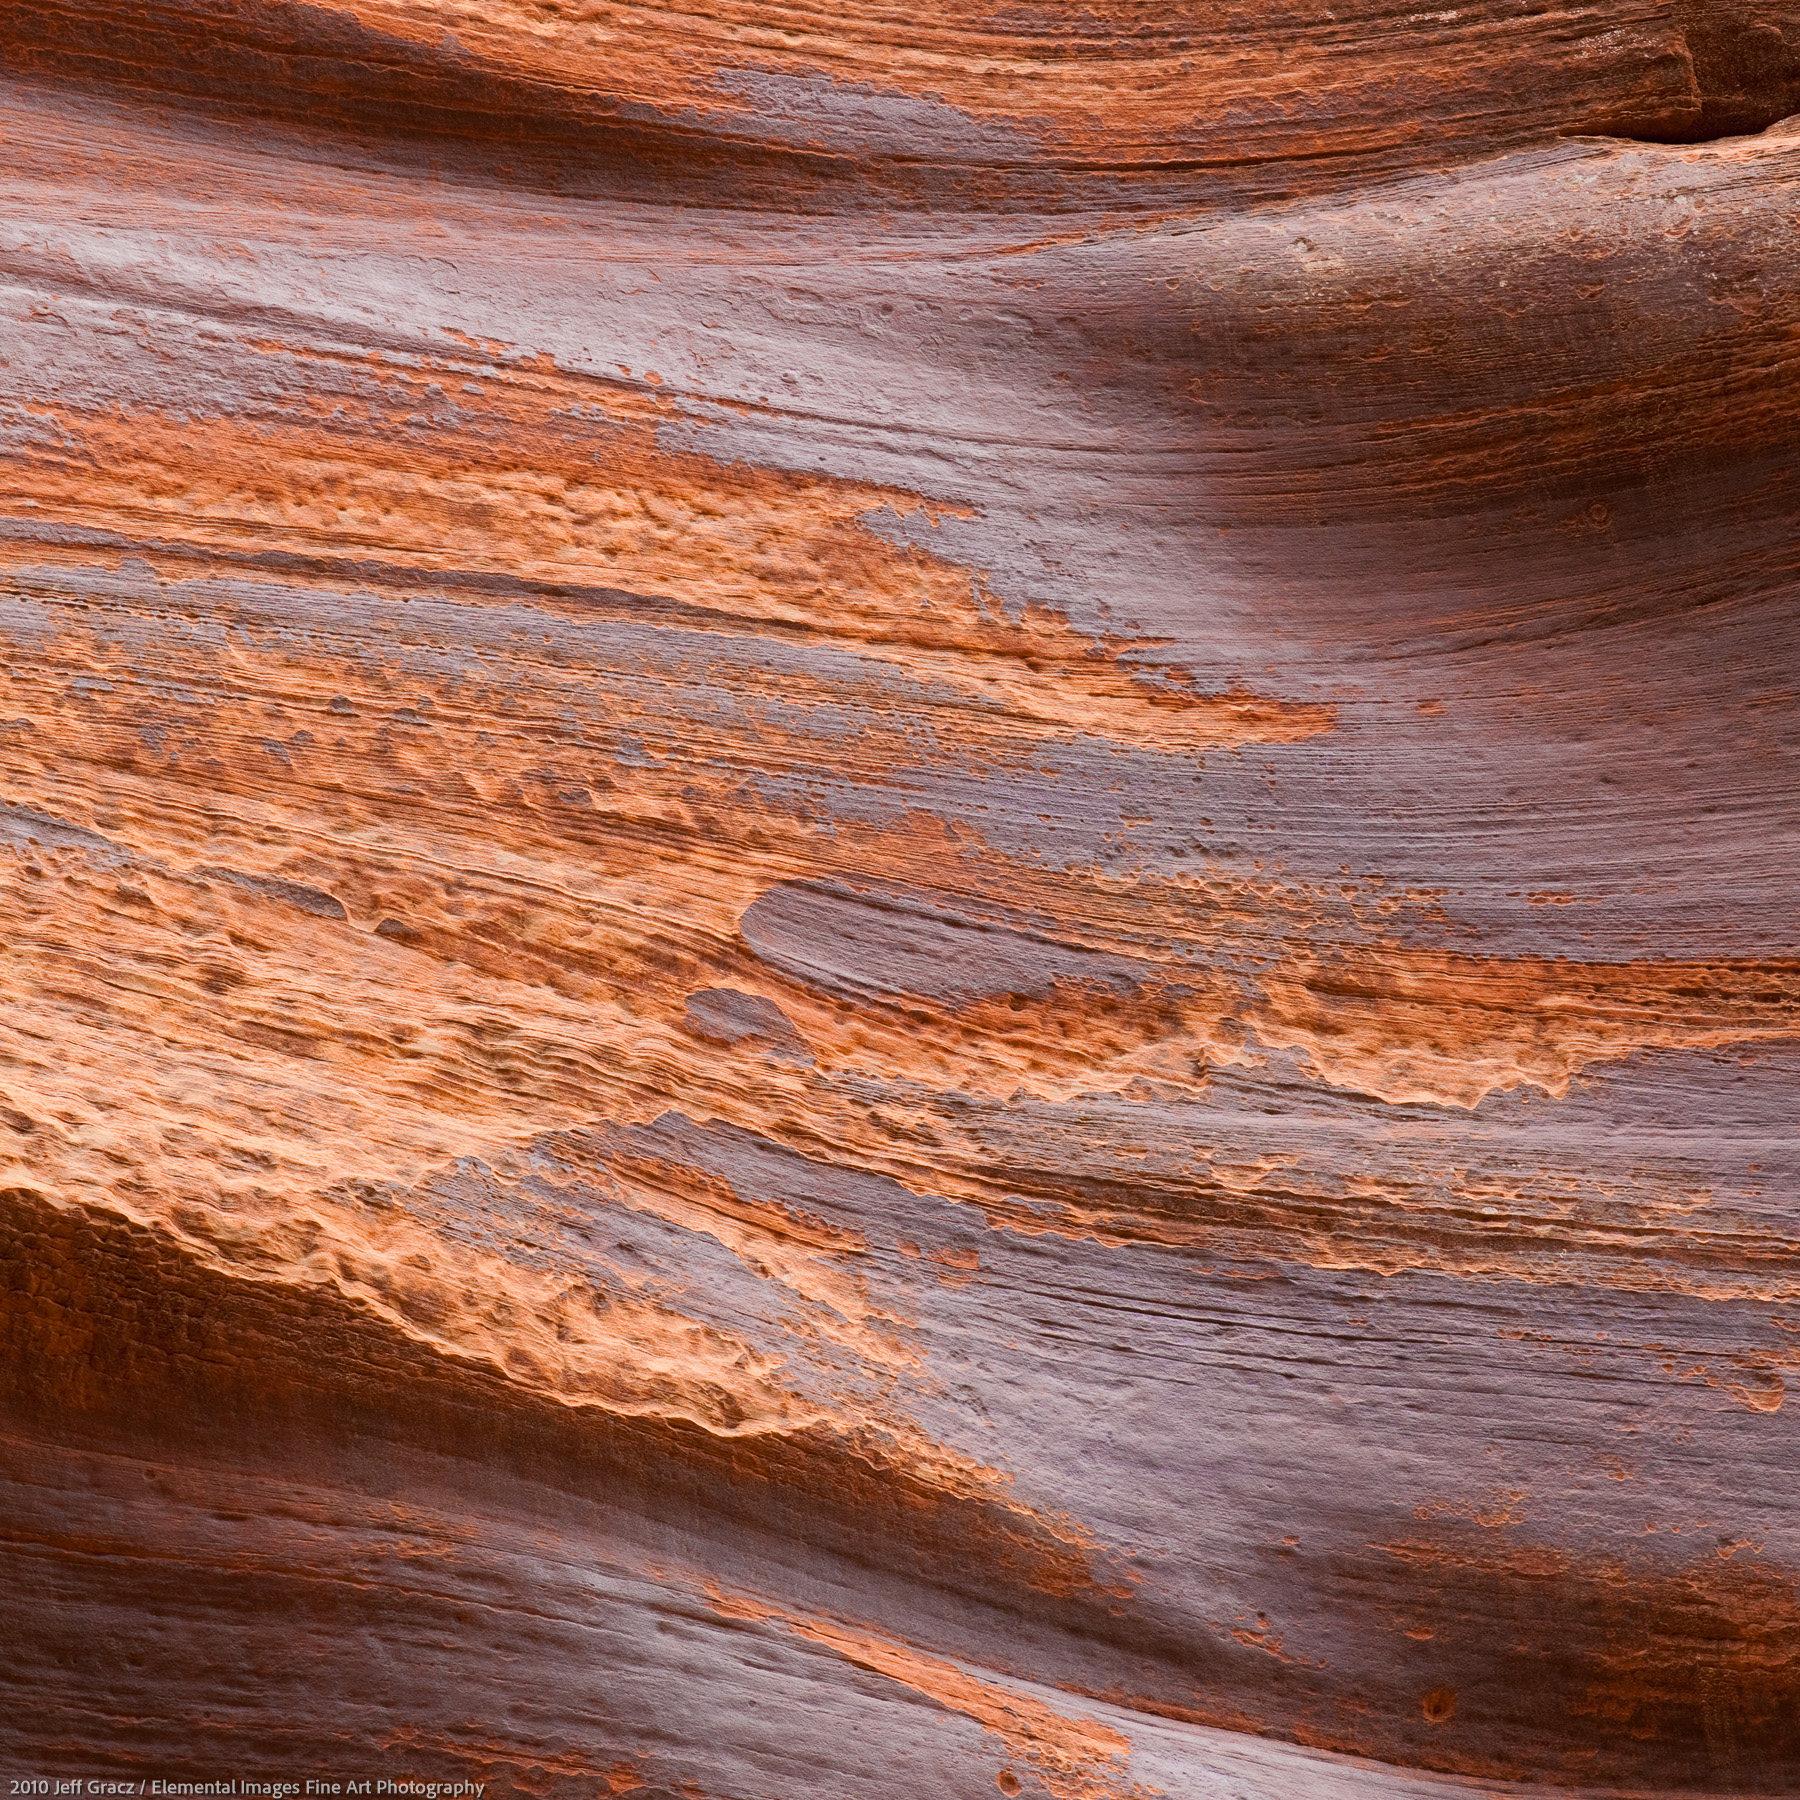 Canyon Wall VIII | Paria Canyon / Vermillion Cliffs Wilderness | UT | USA - © 2010 Jeff Gracz / Elemental Images Fine Art Photography - All Rights Reserved Worldwide